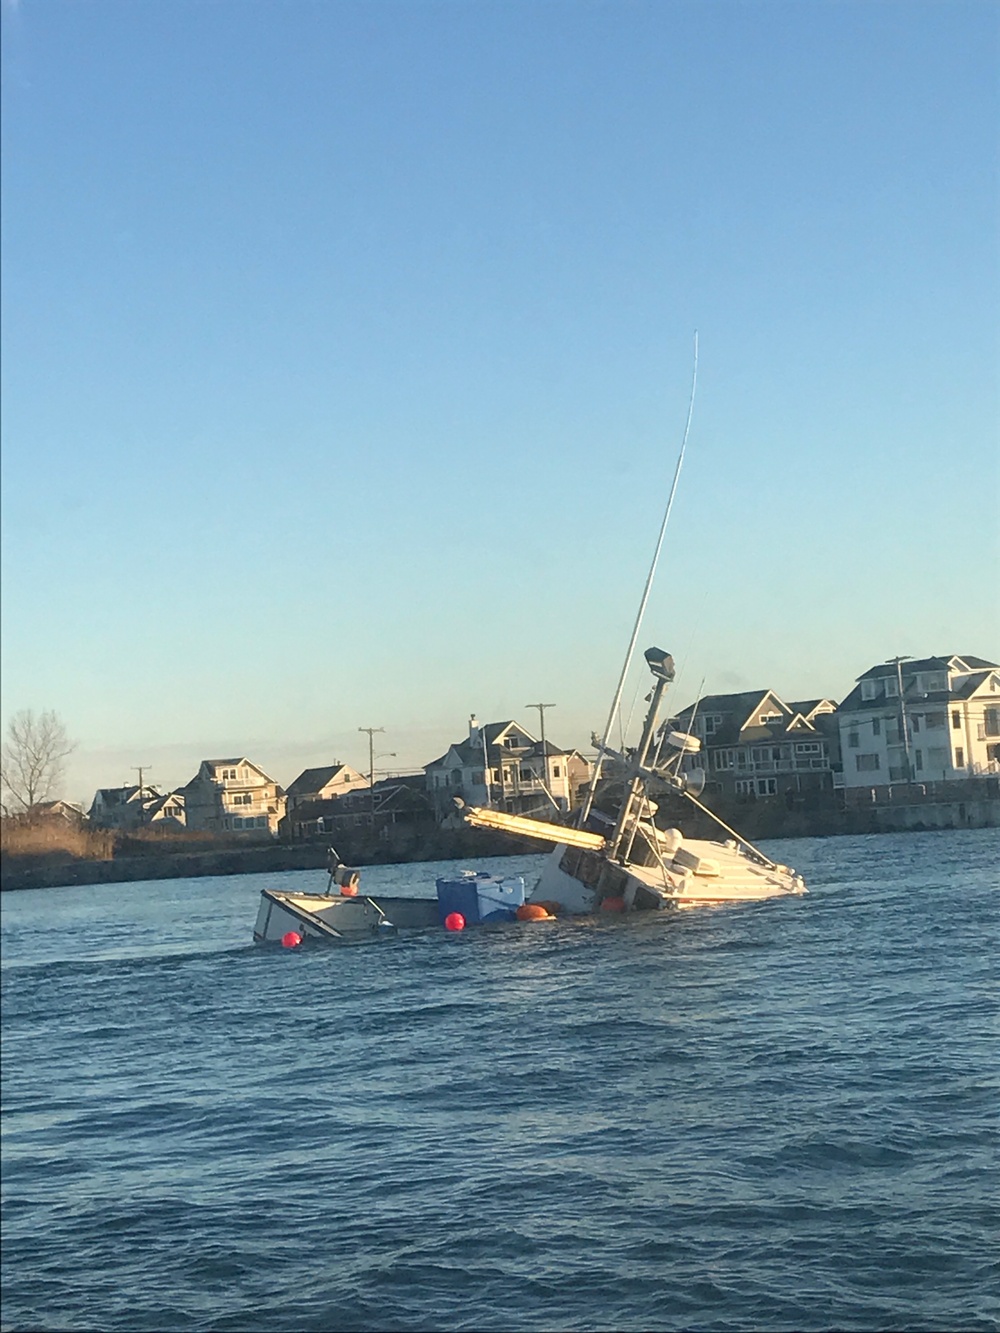 Coast Guard monitoring salvage of partially-sunken vessel in Manasquan Inlet, NJ